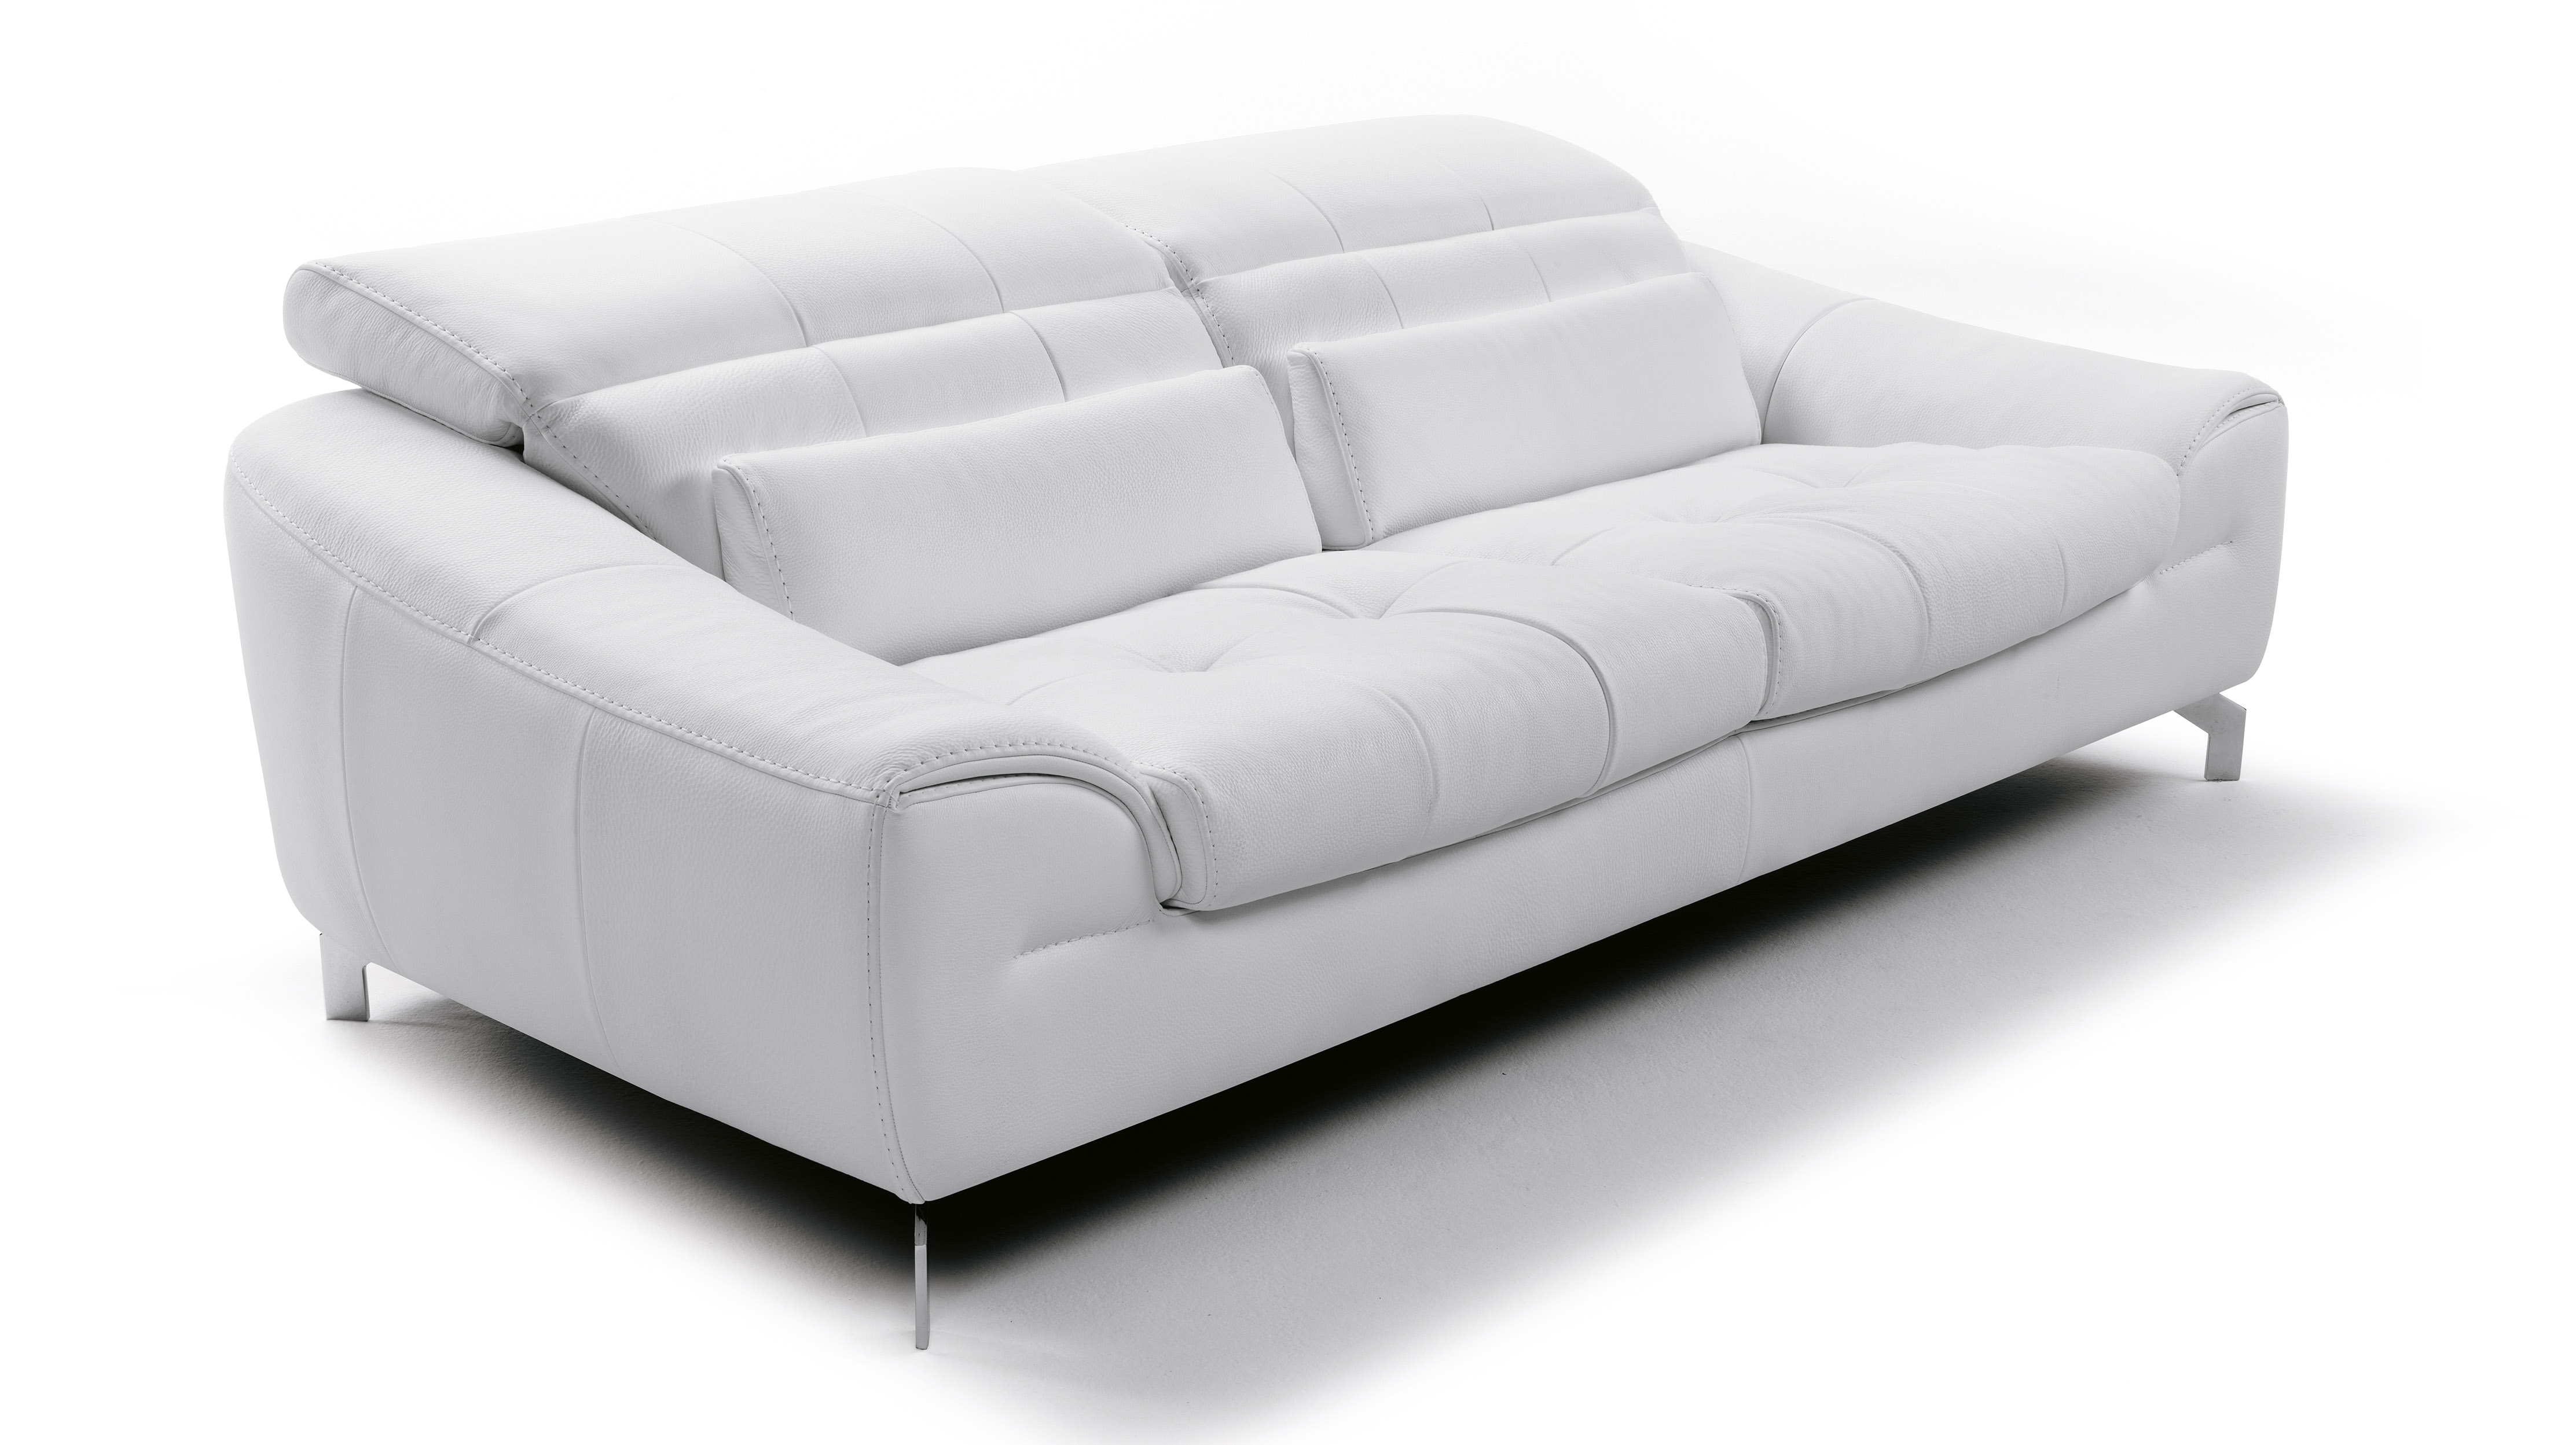 White Sofa Set in Soft Leather with Color Options San Diego